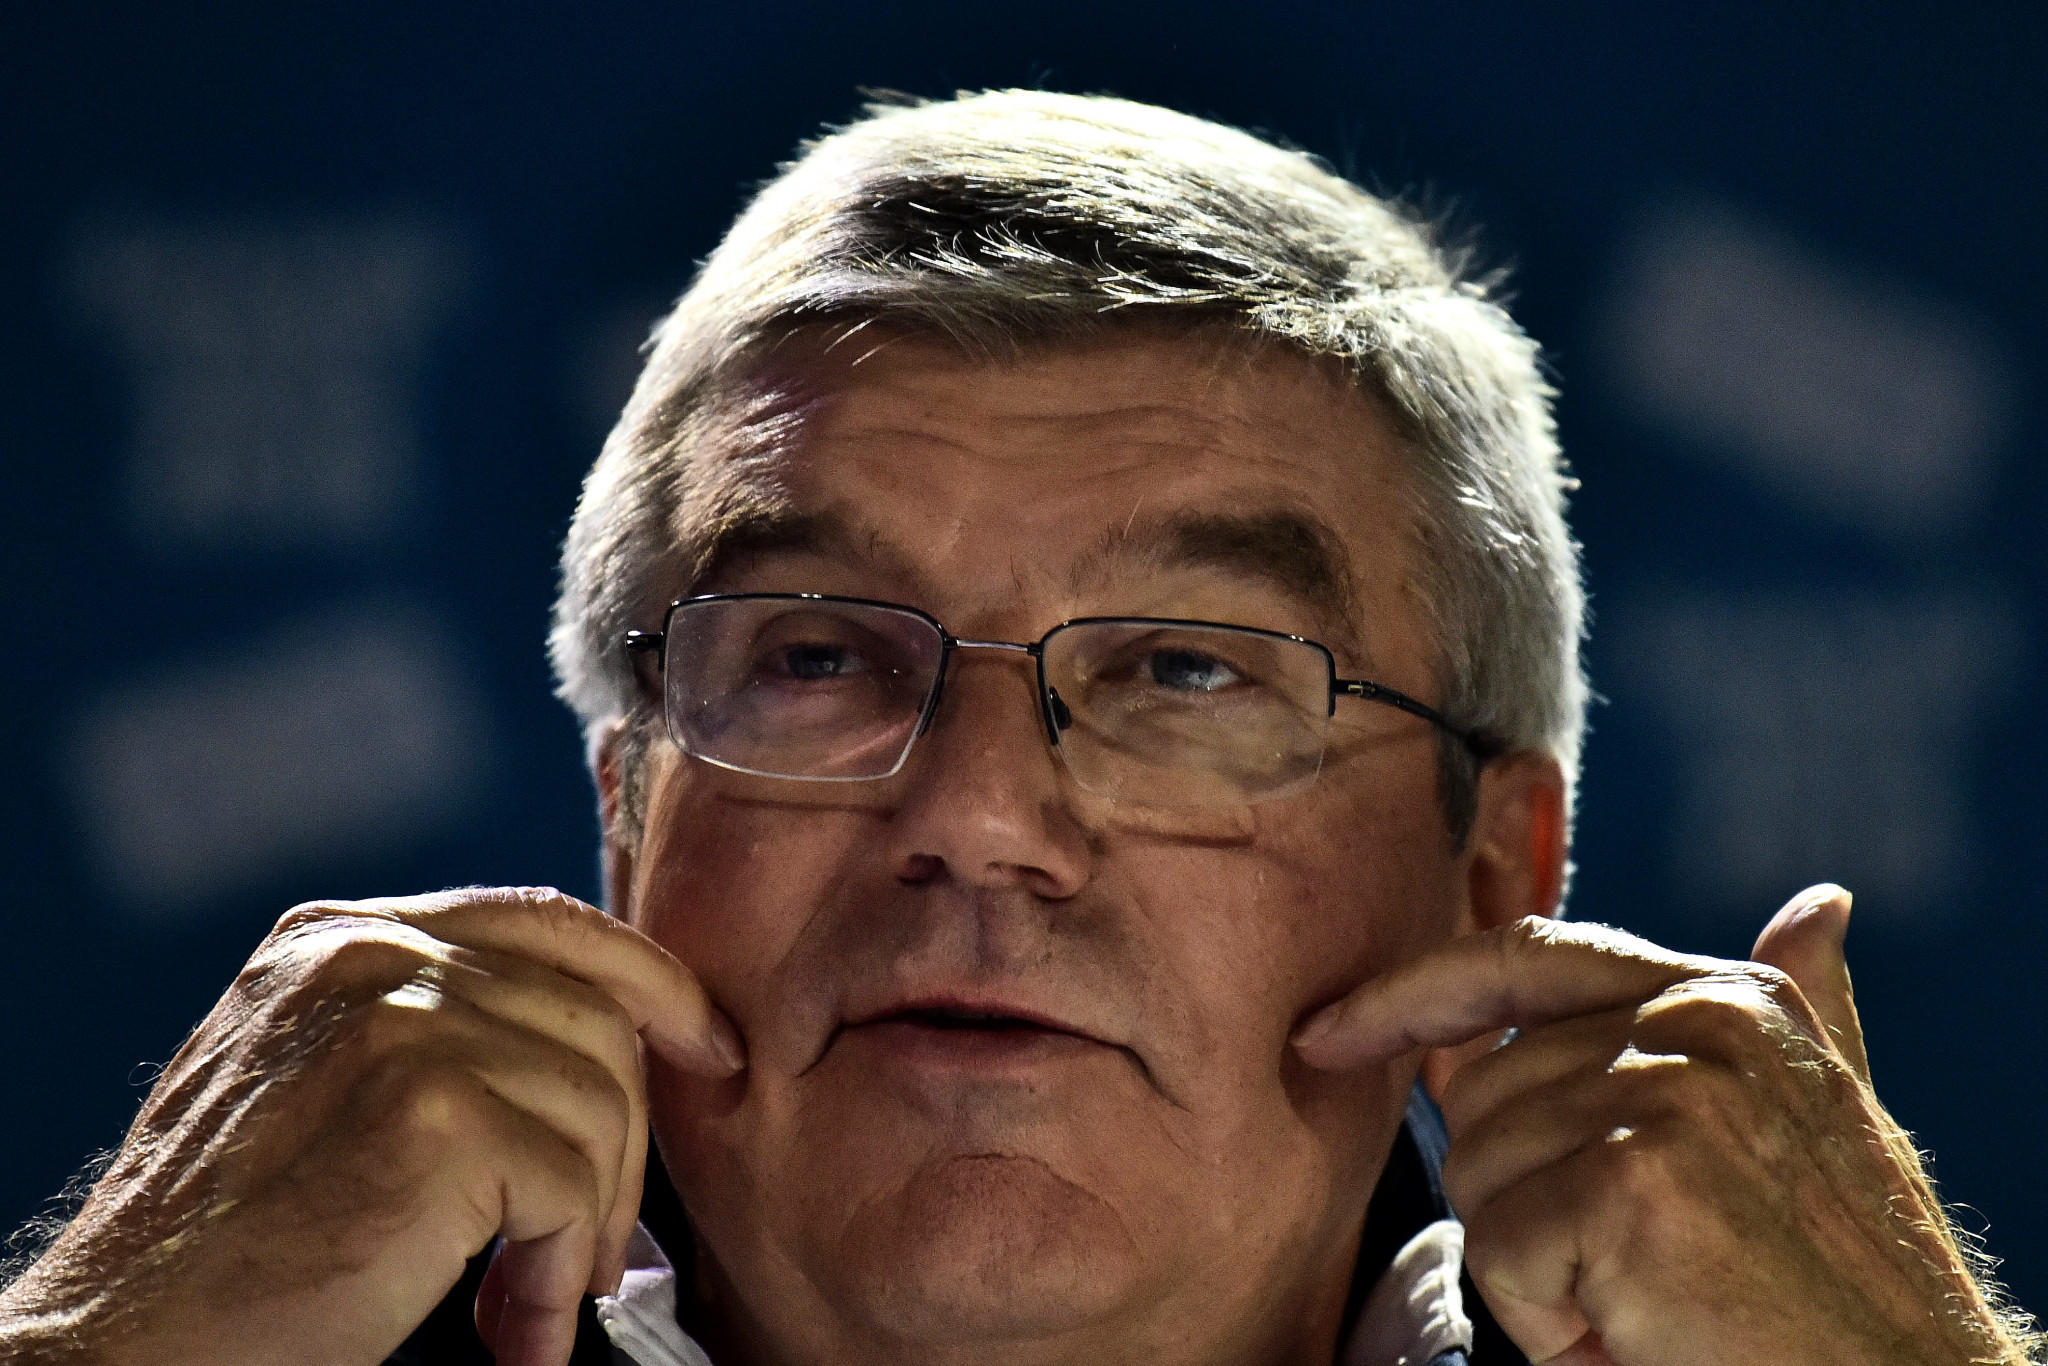 IOC President Thomas Bach made a dig at the media during the closing Buenos Aires 2018 press conference ©Getty Images